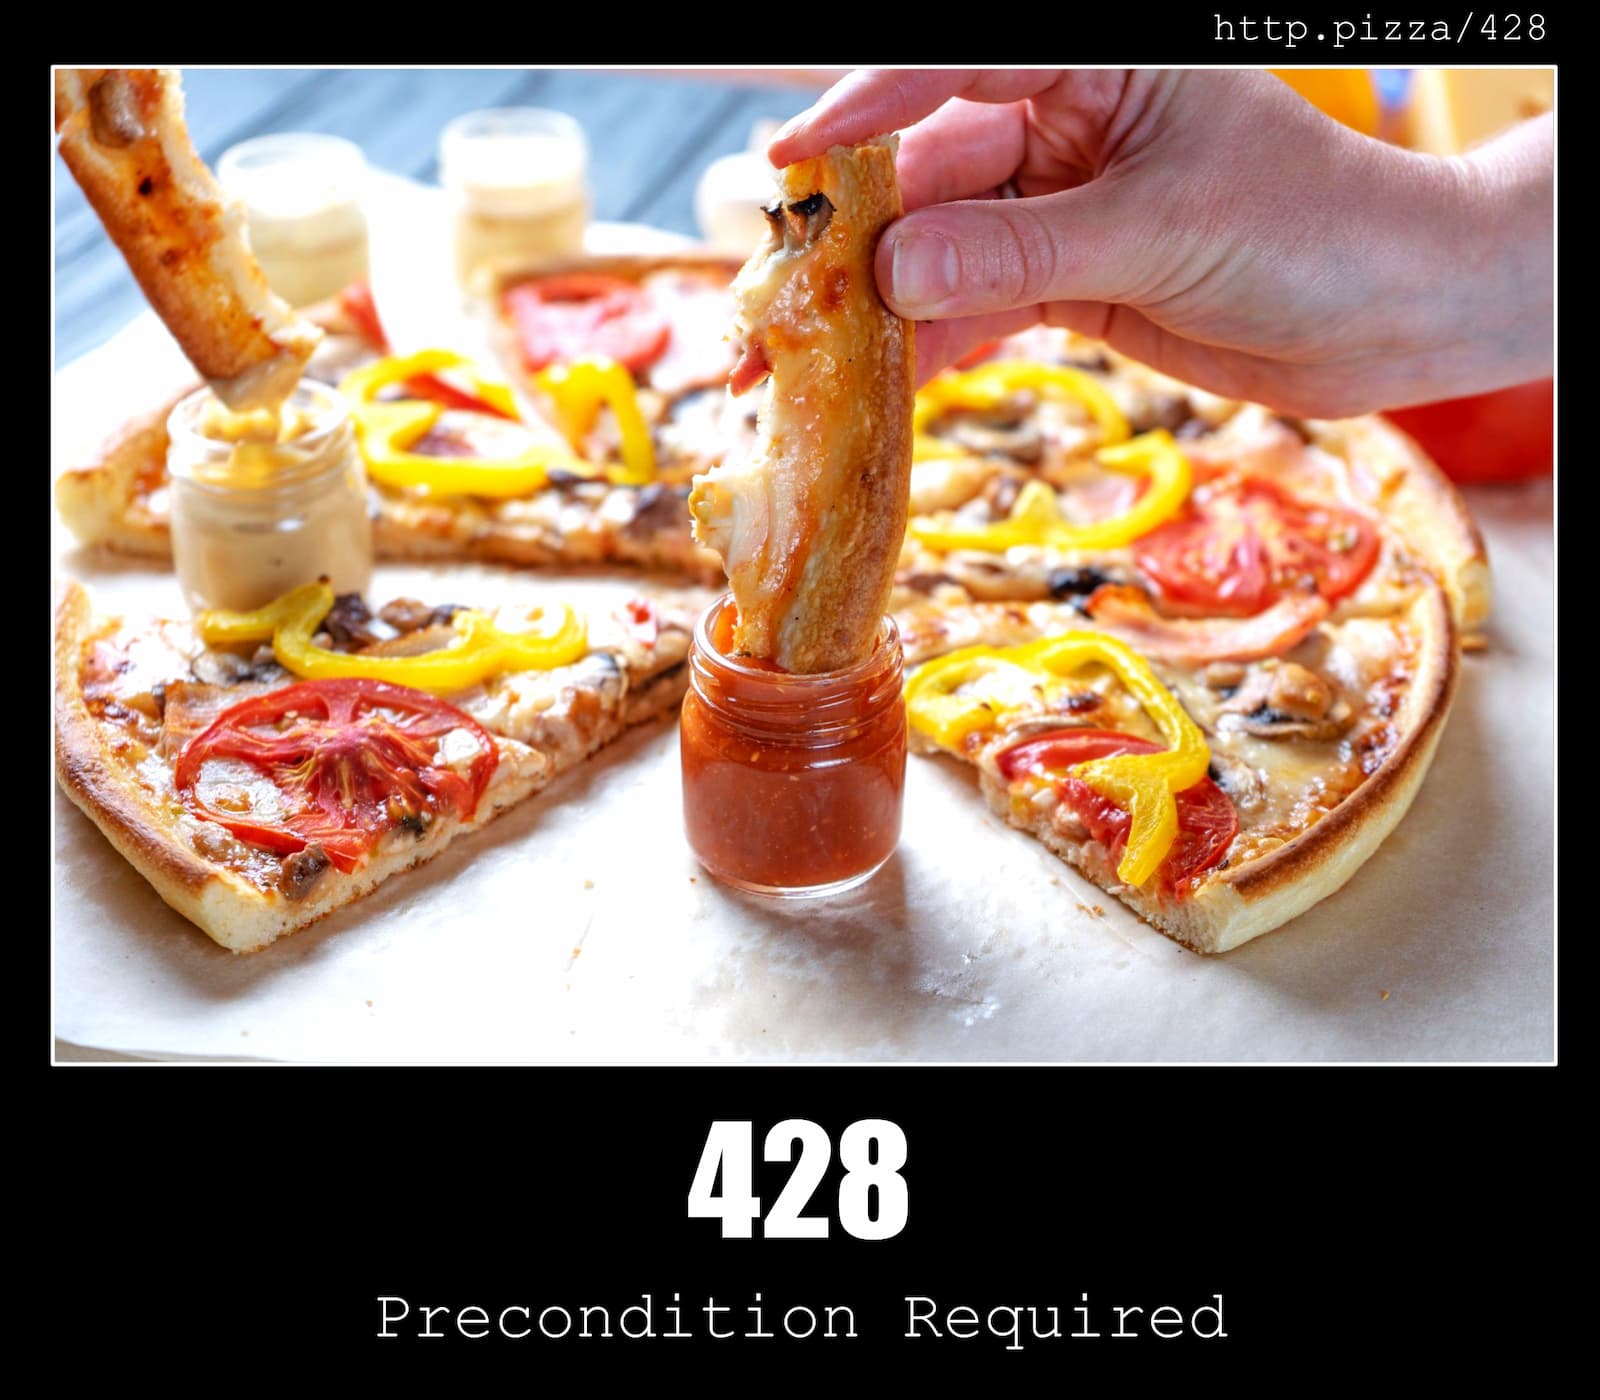 HTTP Status Code 428 Precondition Required & Pizzas